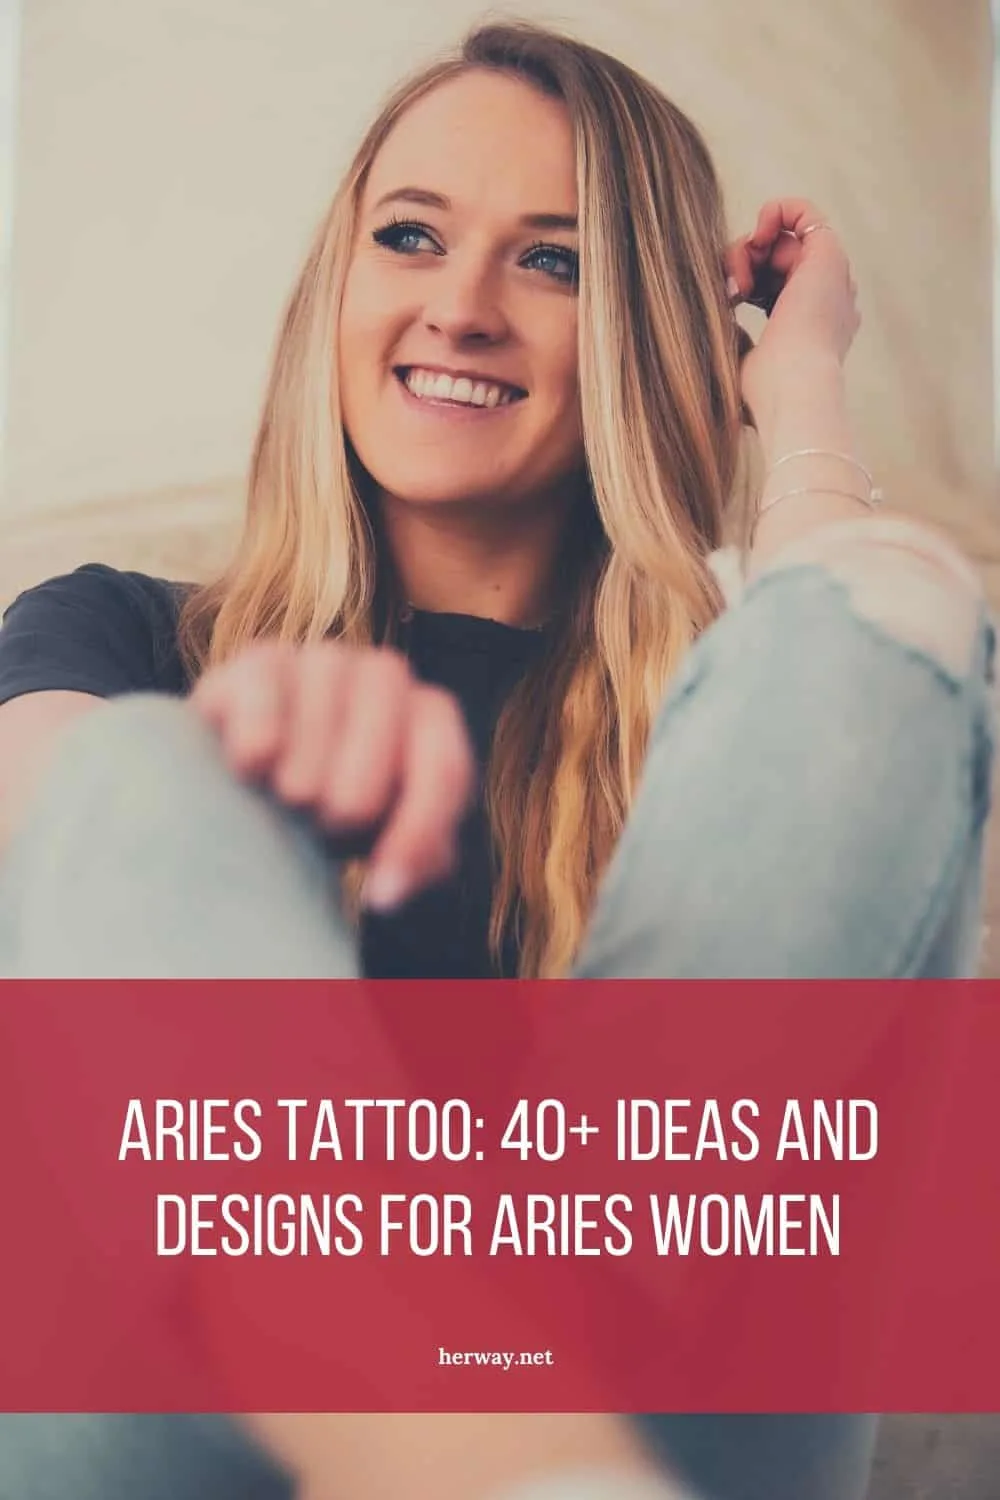 Aries Tattoo 40+ Ideas And Designs For Aries Women Pinterest